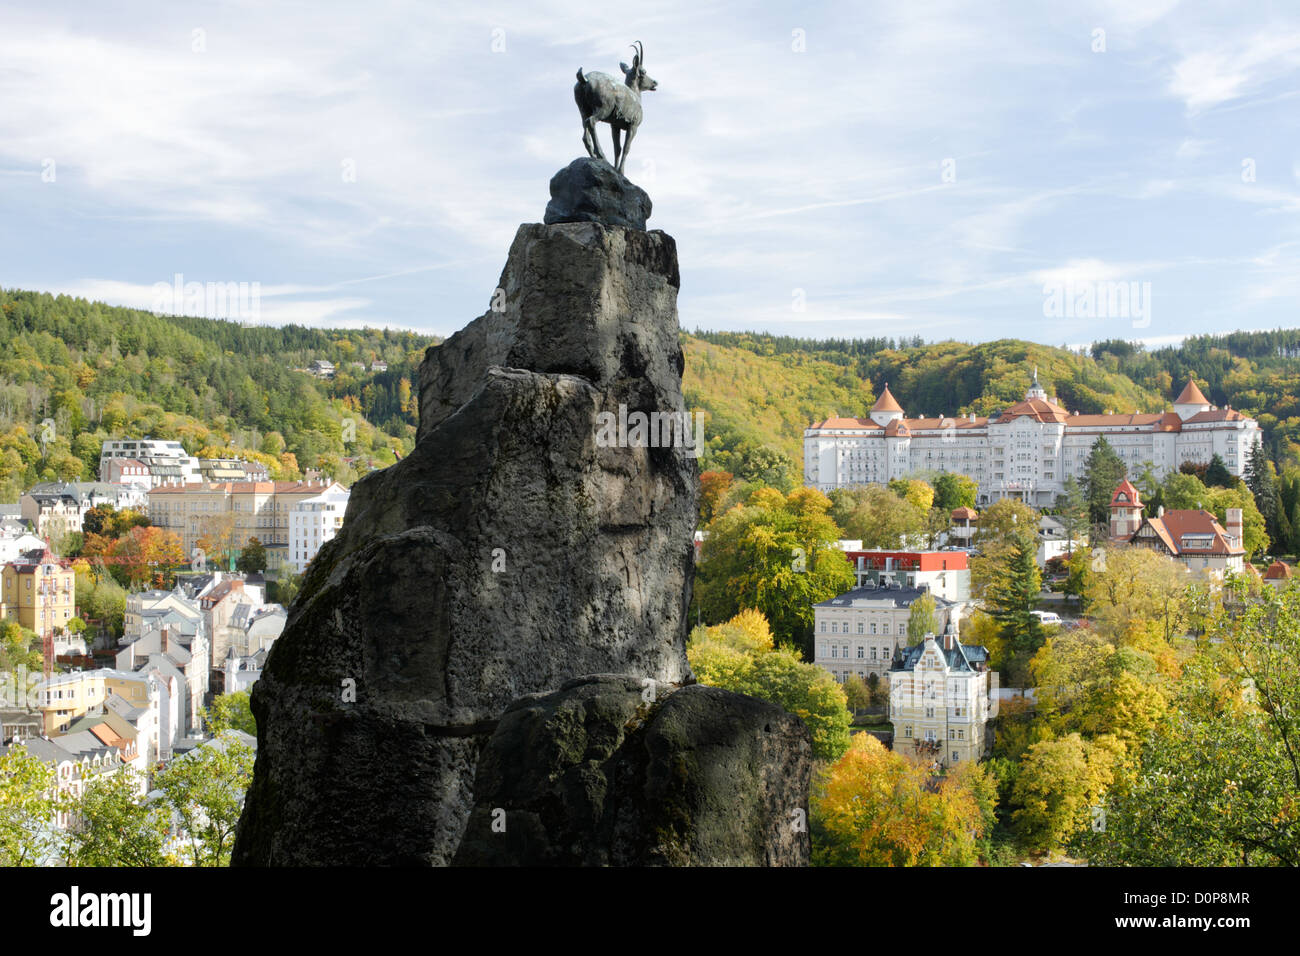 Statue chamois - the original statue in 1851 by Berlin sculptor August Kiss, Karlovy Vary, Czech Republic, Europe Stock Photo